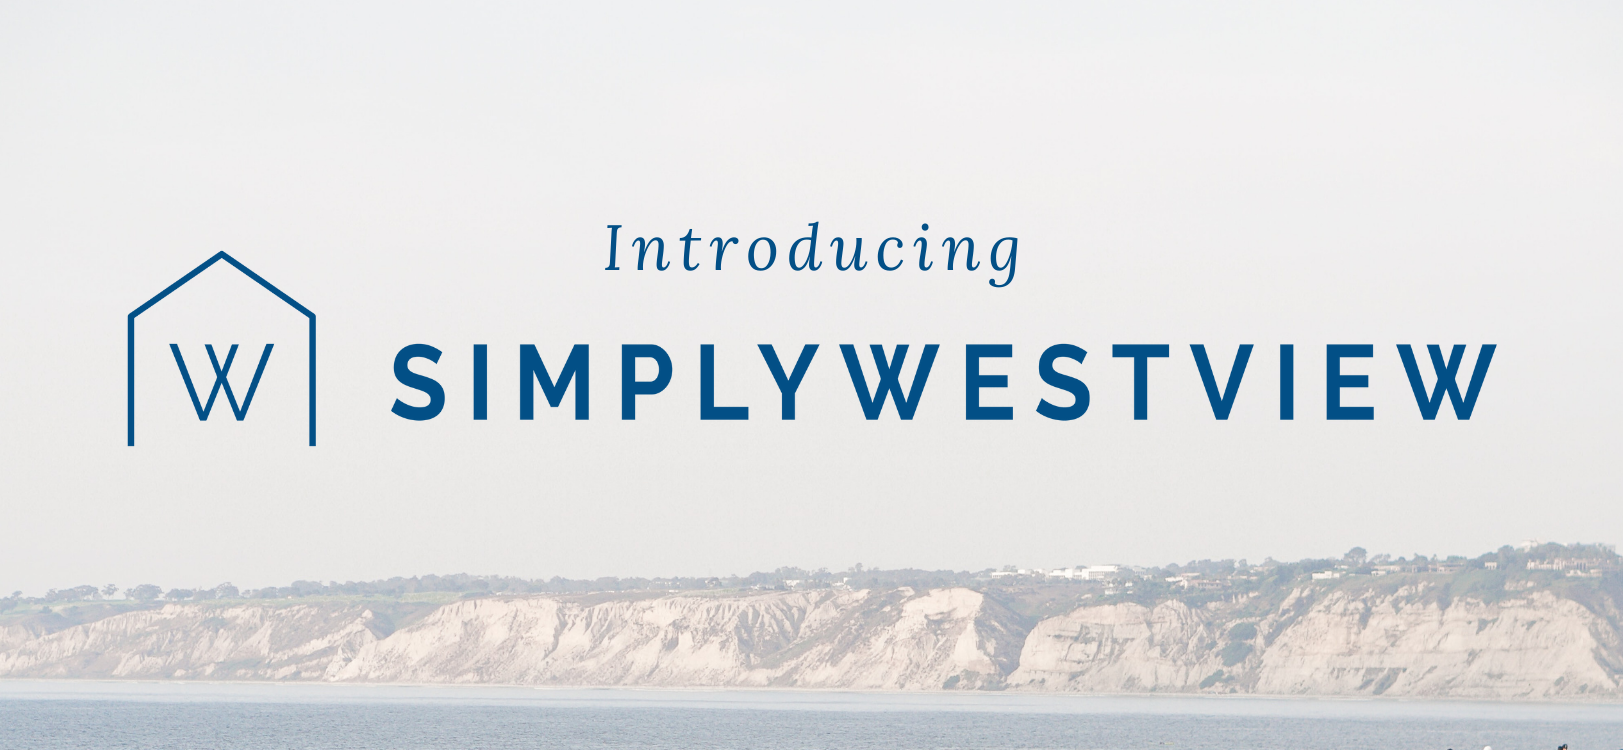 Introducing Simply Westview